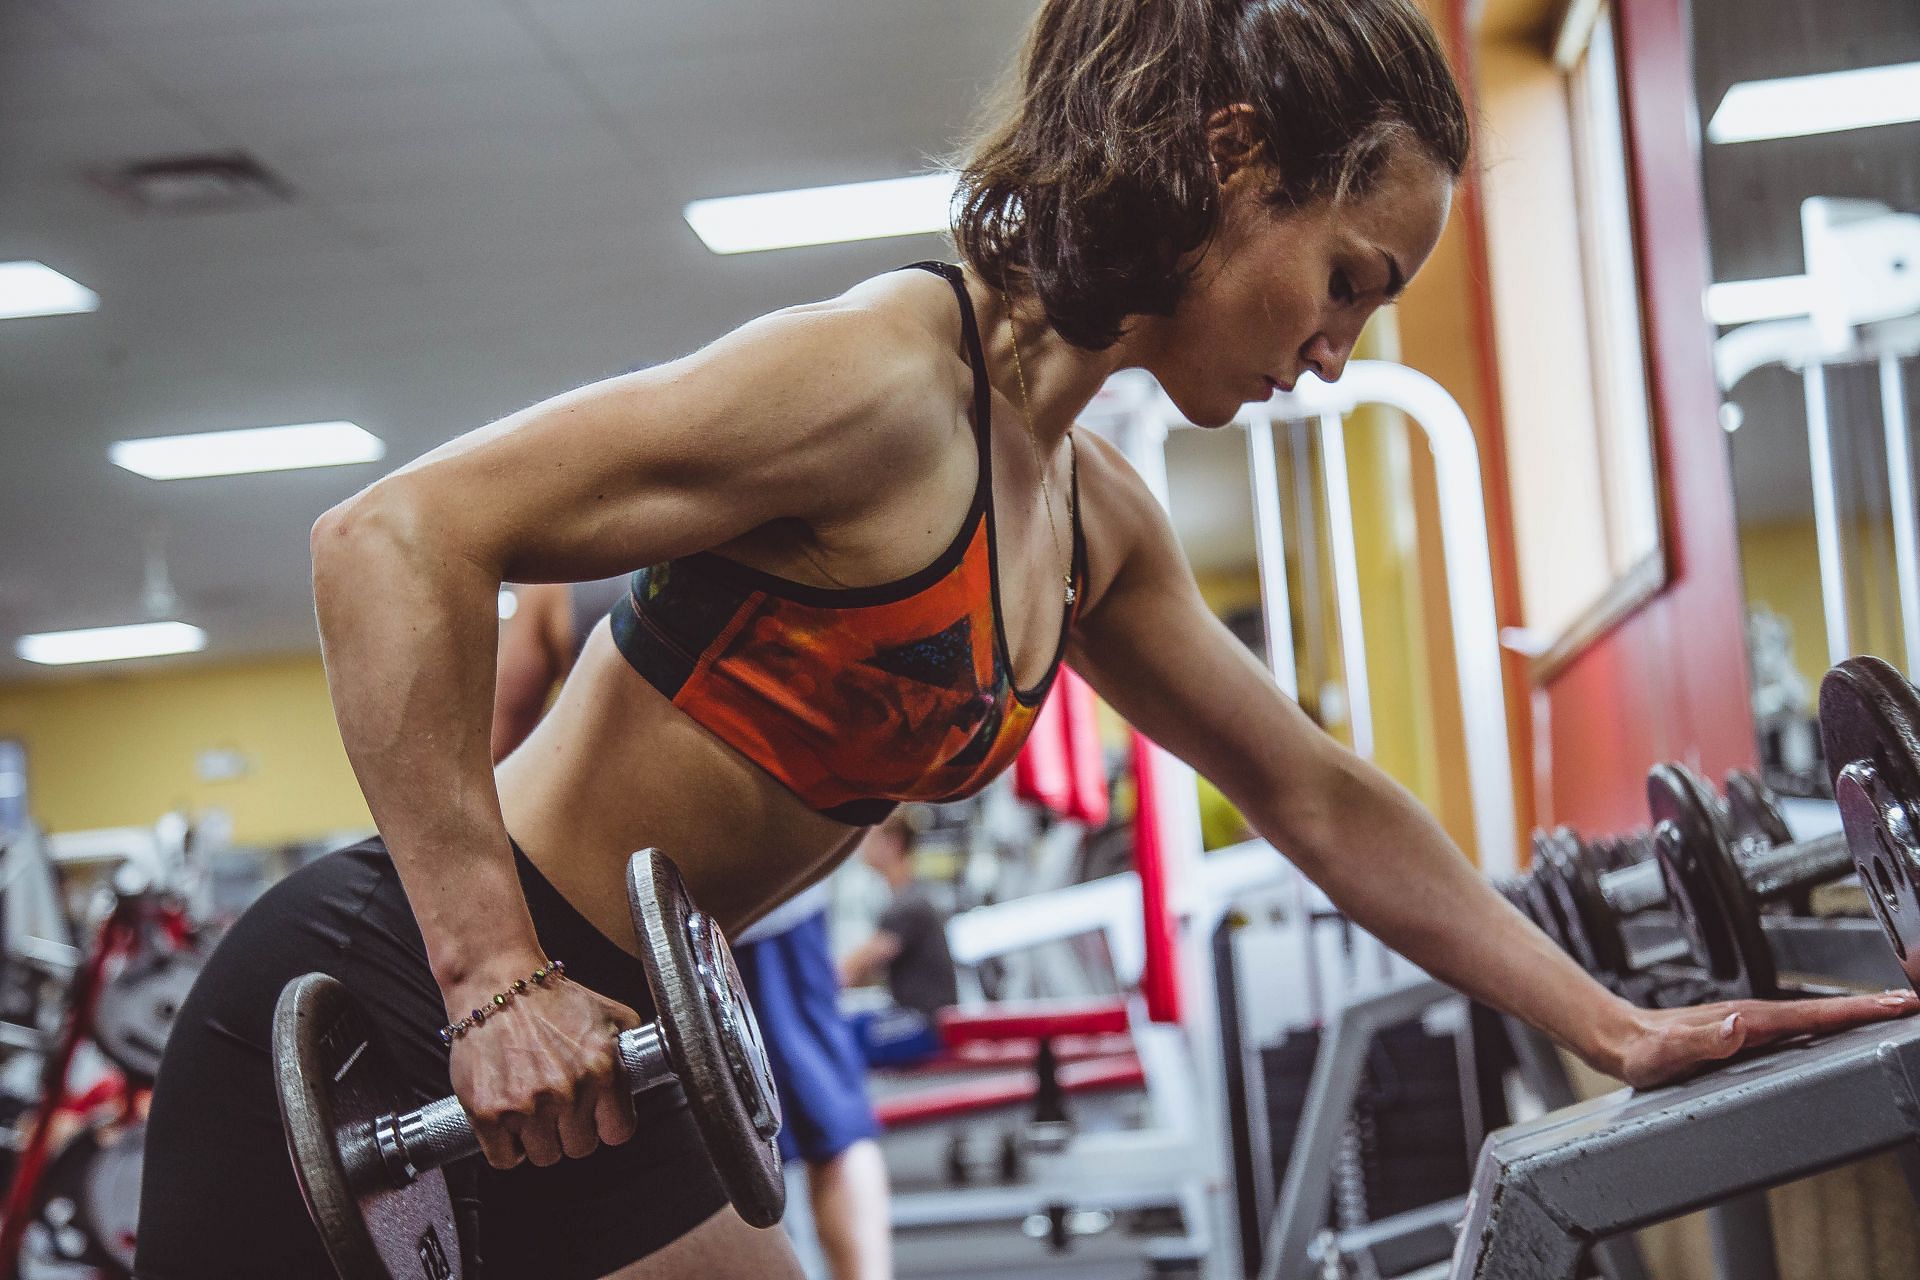 Arm toning exercises women can include in their workout (Image via Unsplash/Alora Griffiths)